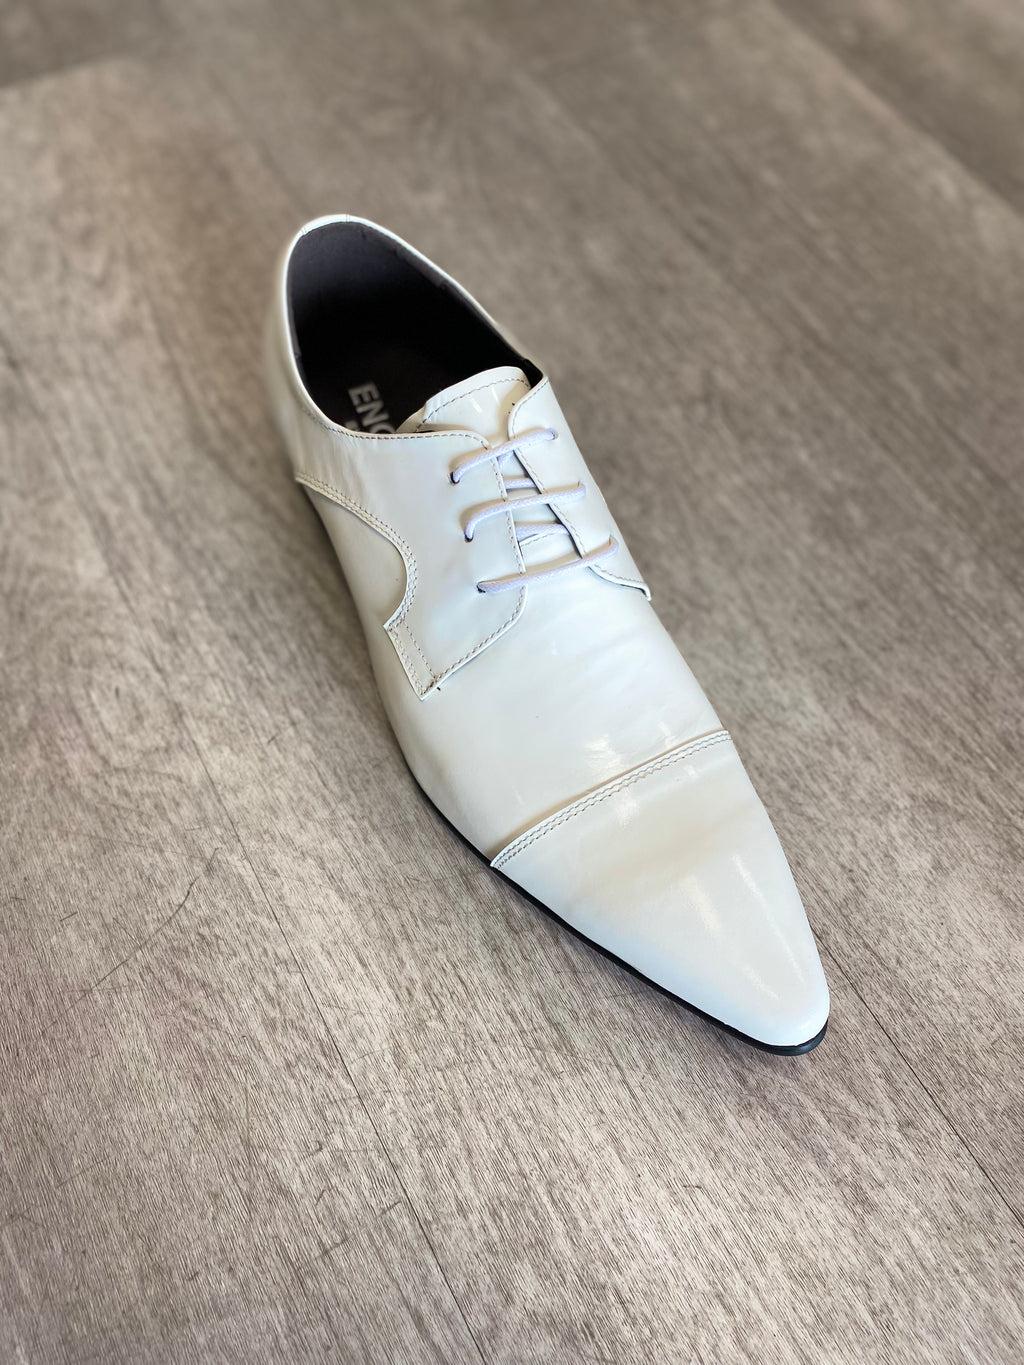 Fiesso Encore Dress Shoes - Off White - SIZE 9,10